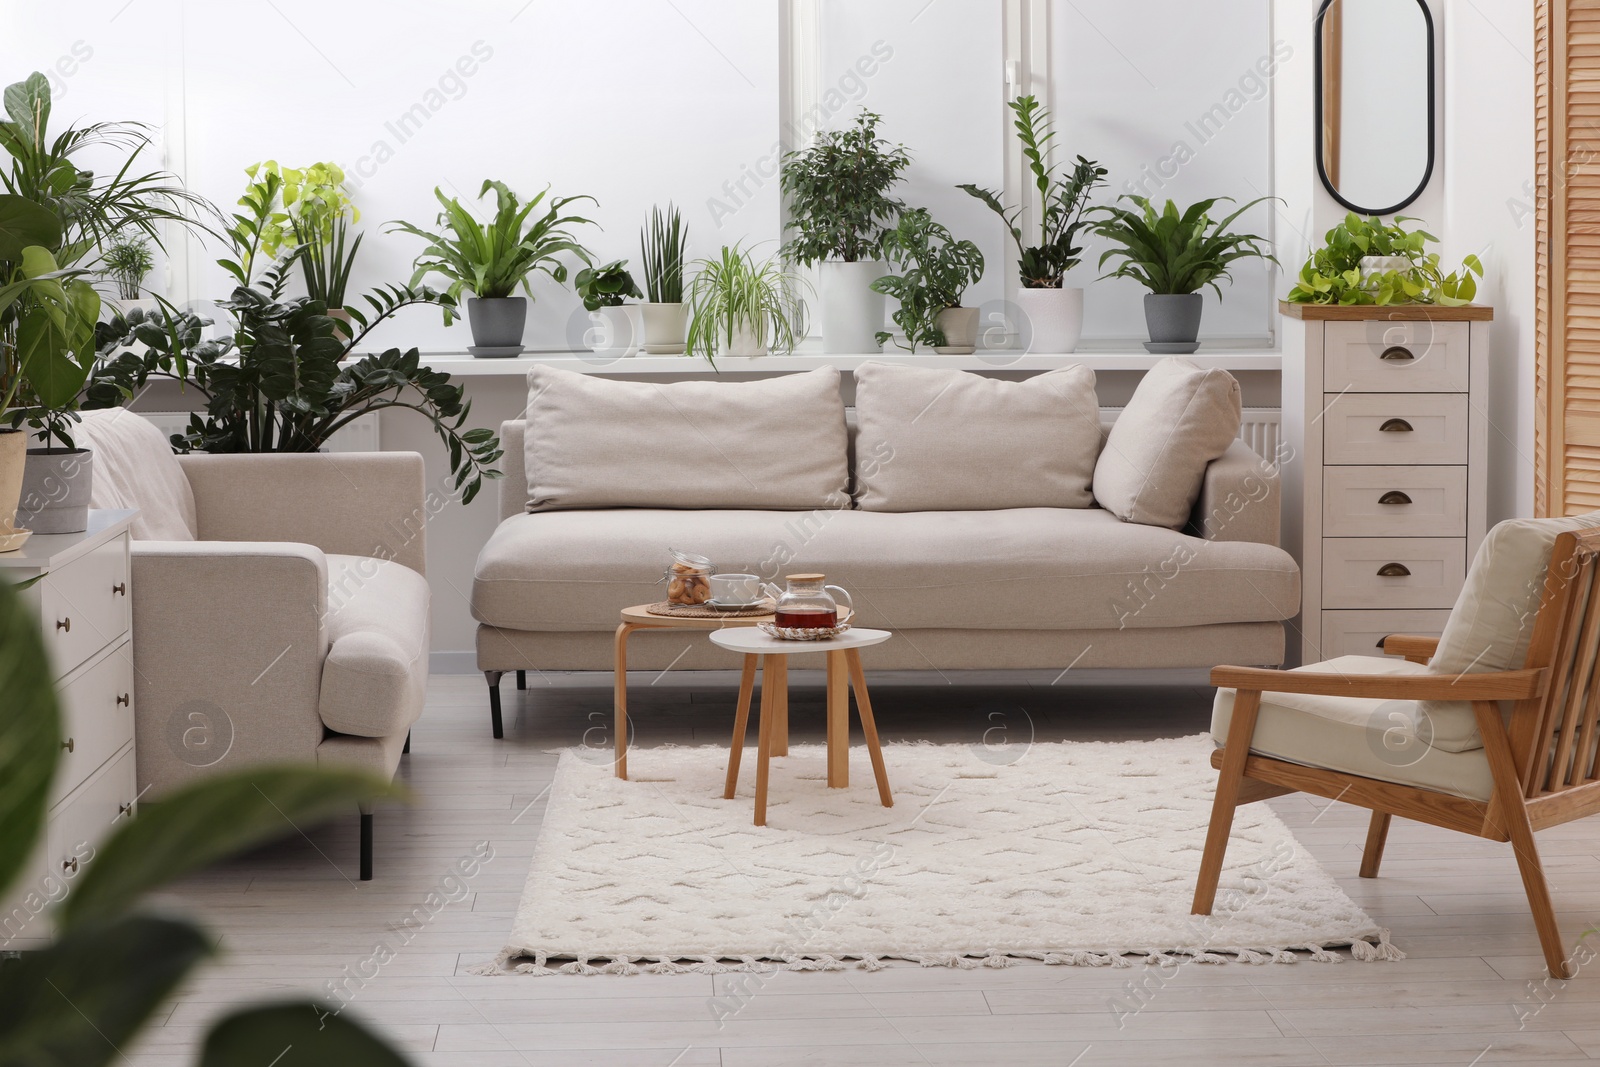 Photo of Stylish room with different potted green plants and comfortable sofa. Interior design